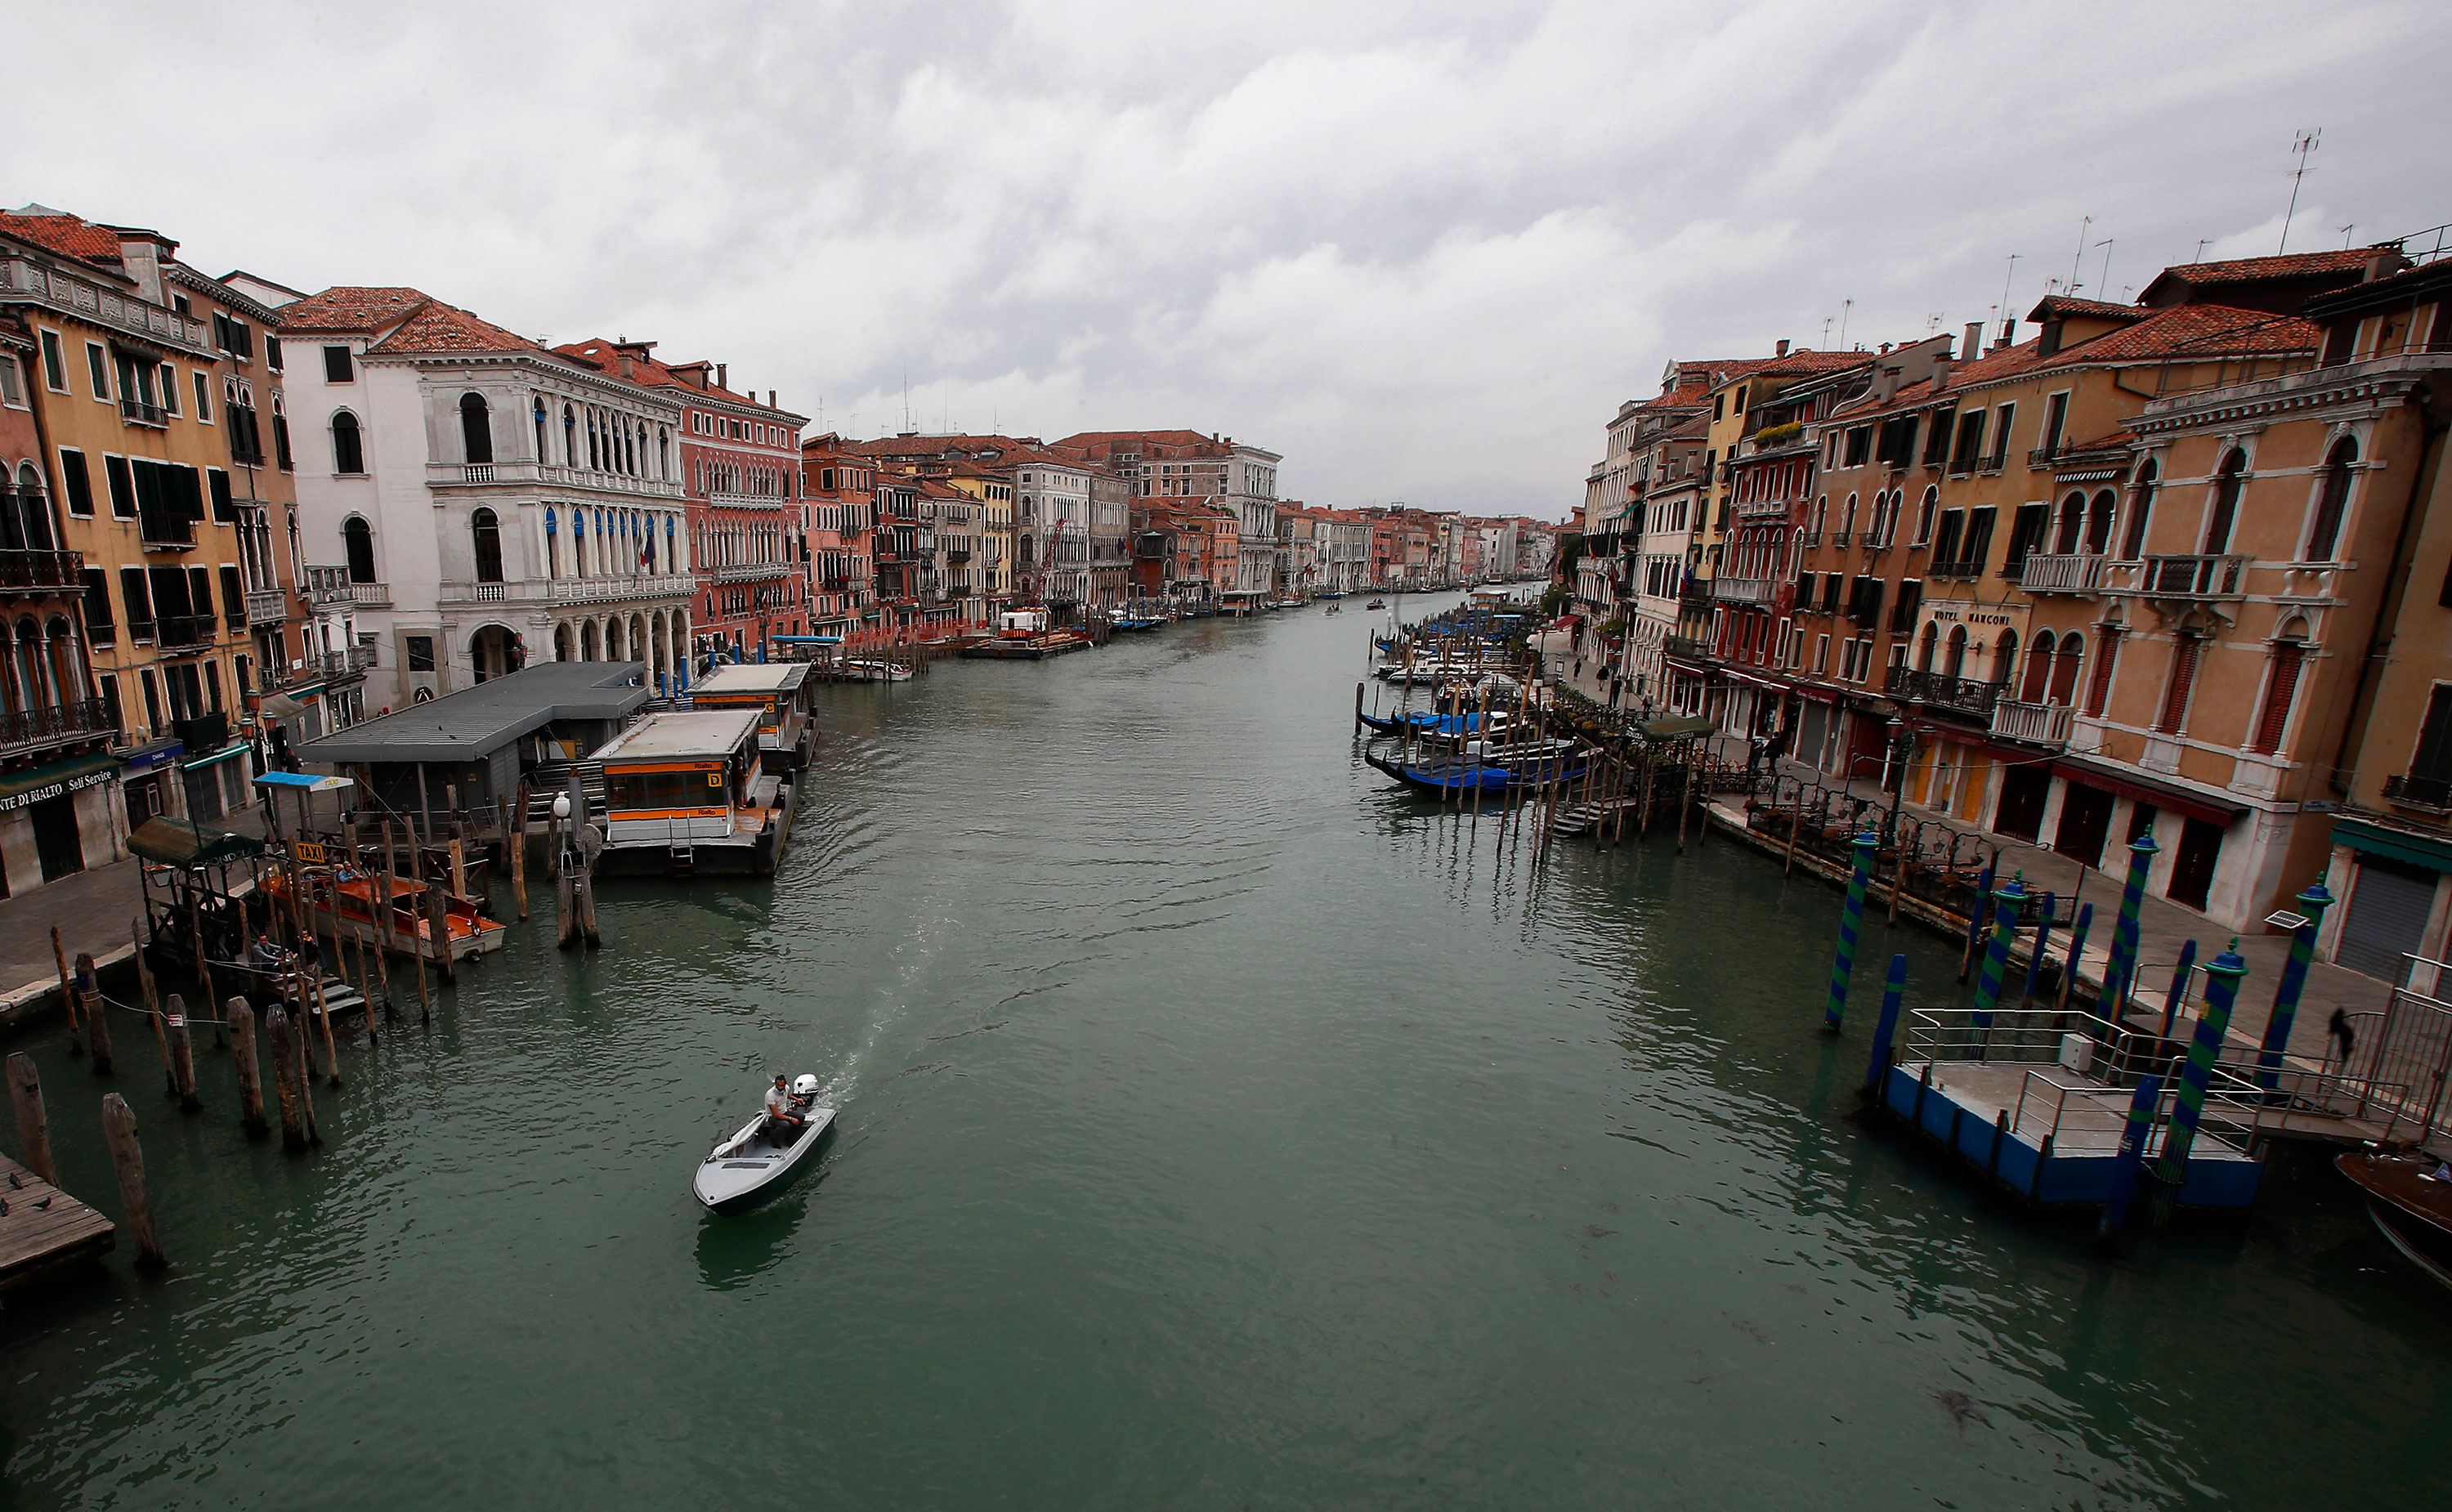 The Grand Canal in Venice, Italy, on May 13.